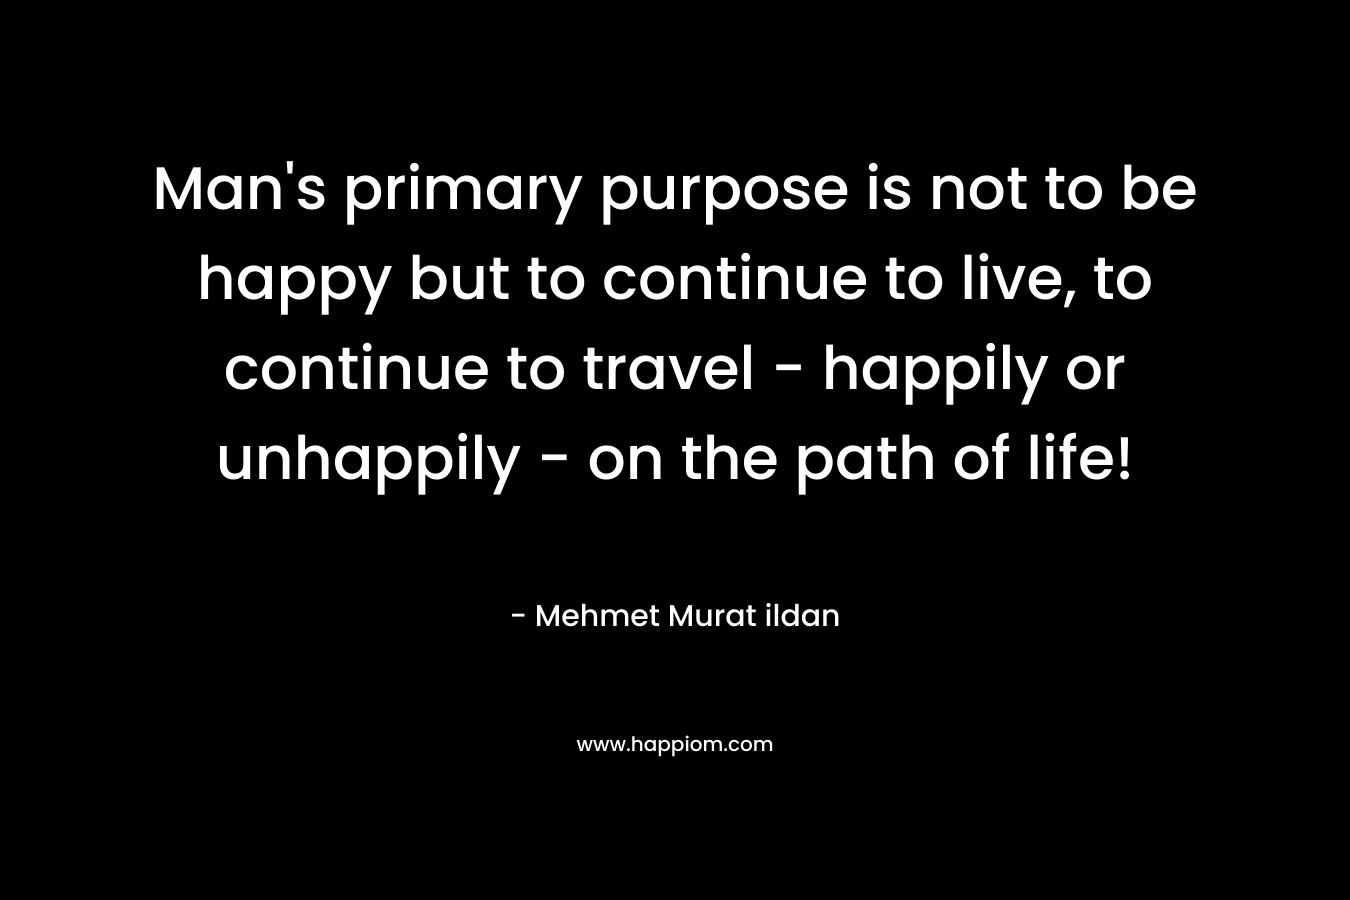 Man's primary purpose is not to be happy but to continue to live, to continue to travel - happily or unhappily - on the path of life!